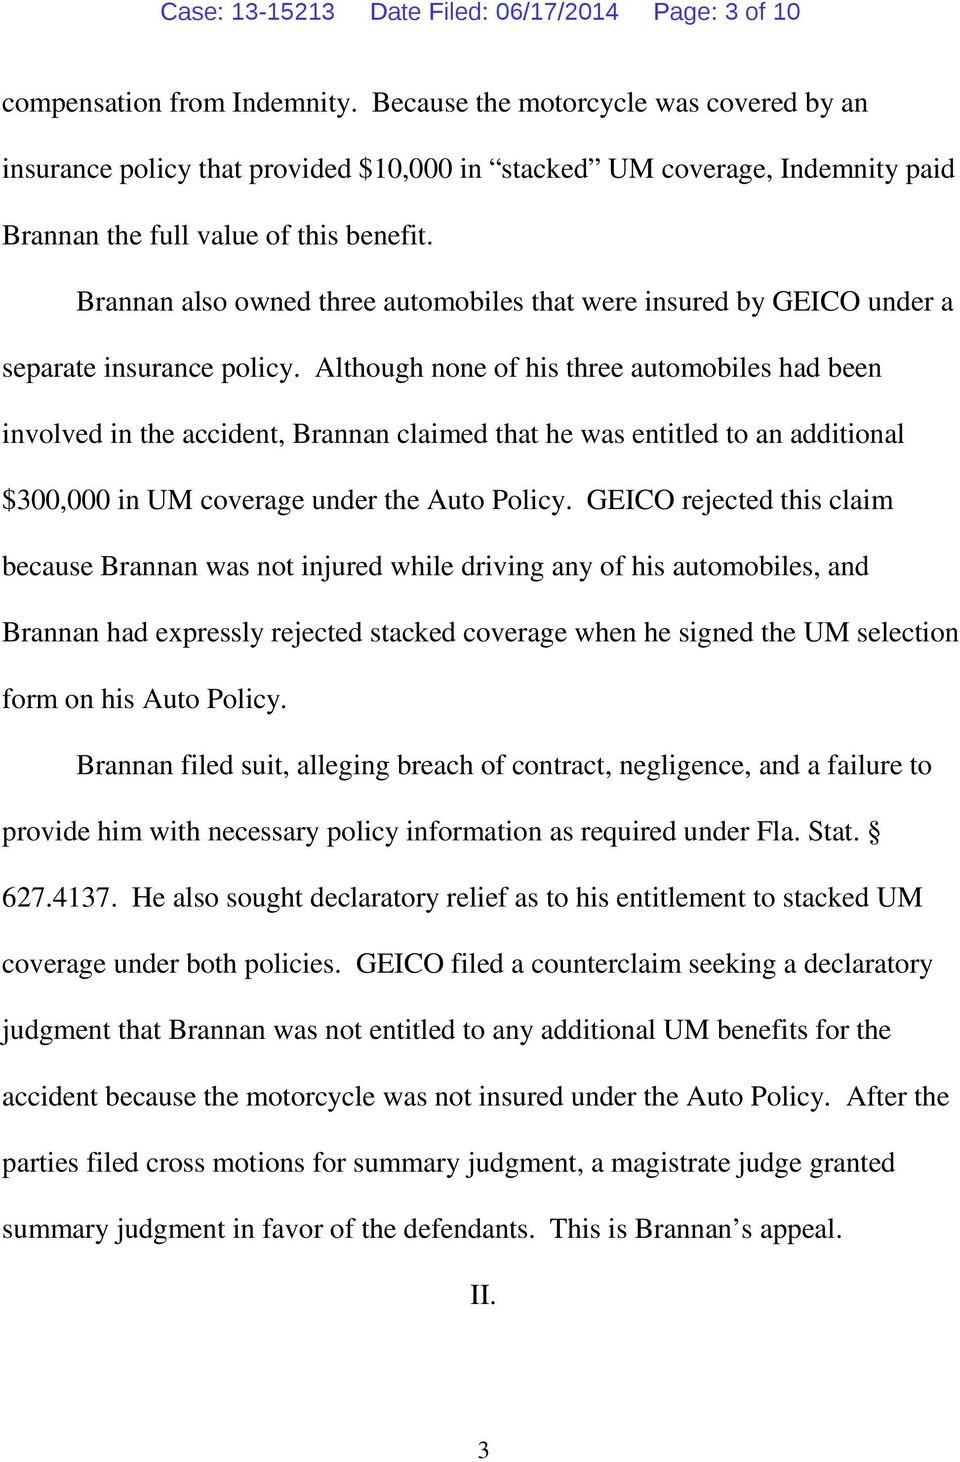 Brannan also owned three automobiles that were insured by GEICO under a separate insurance policy.